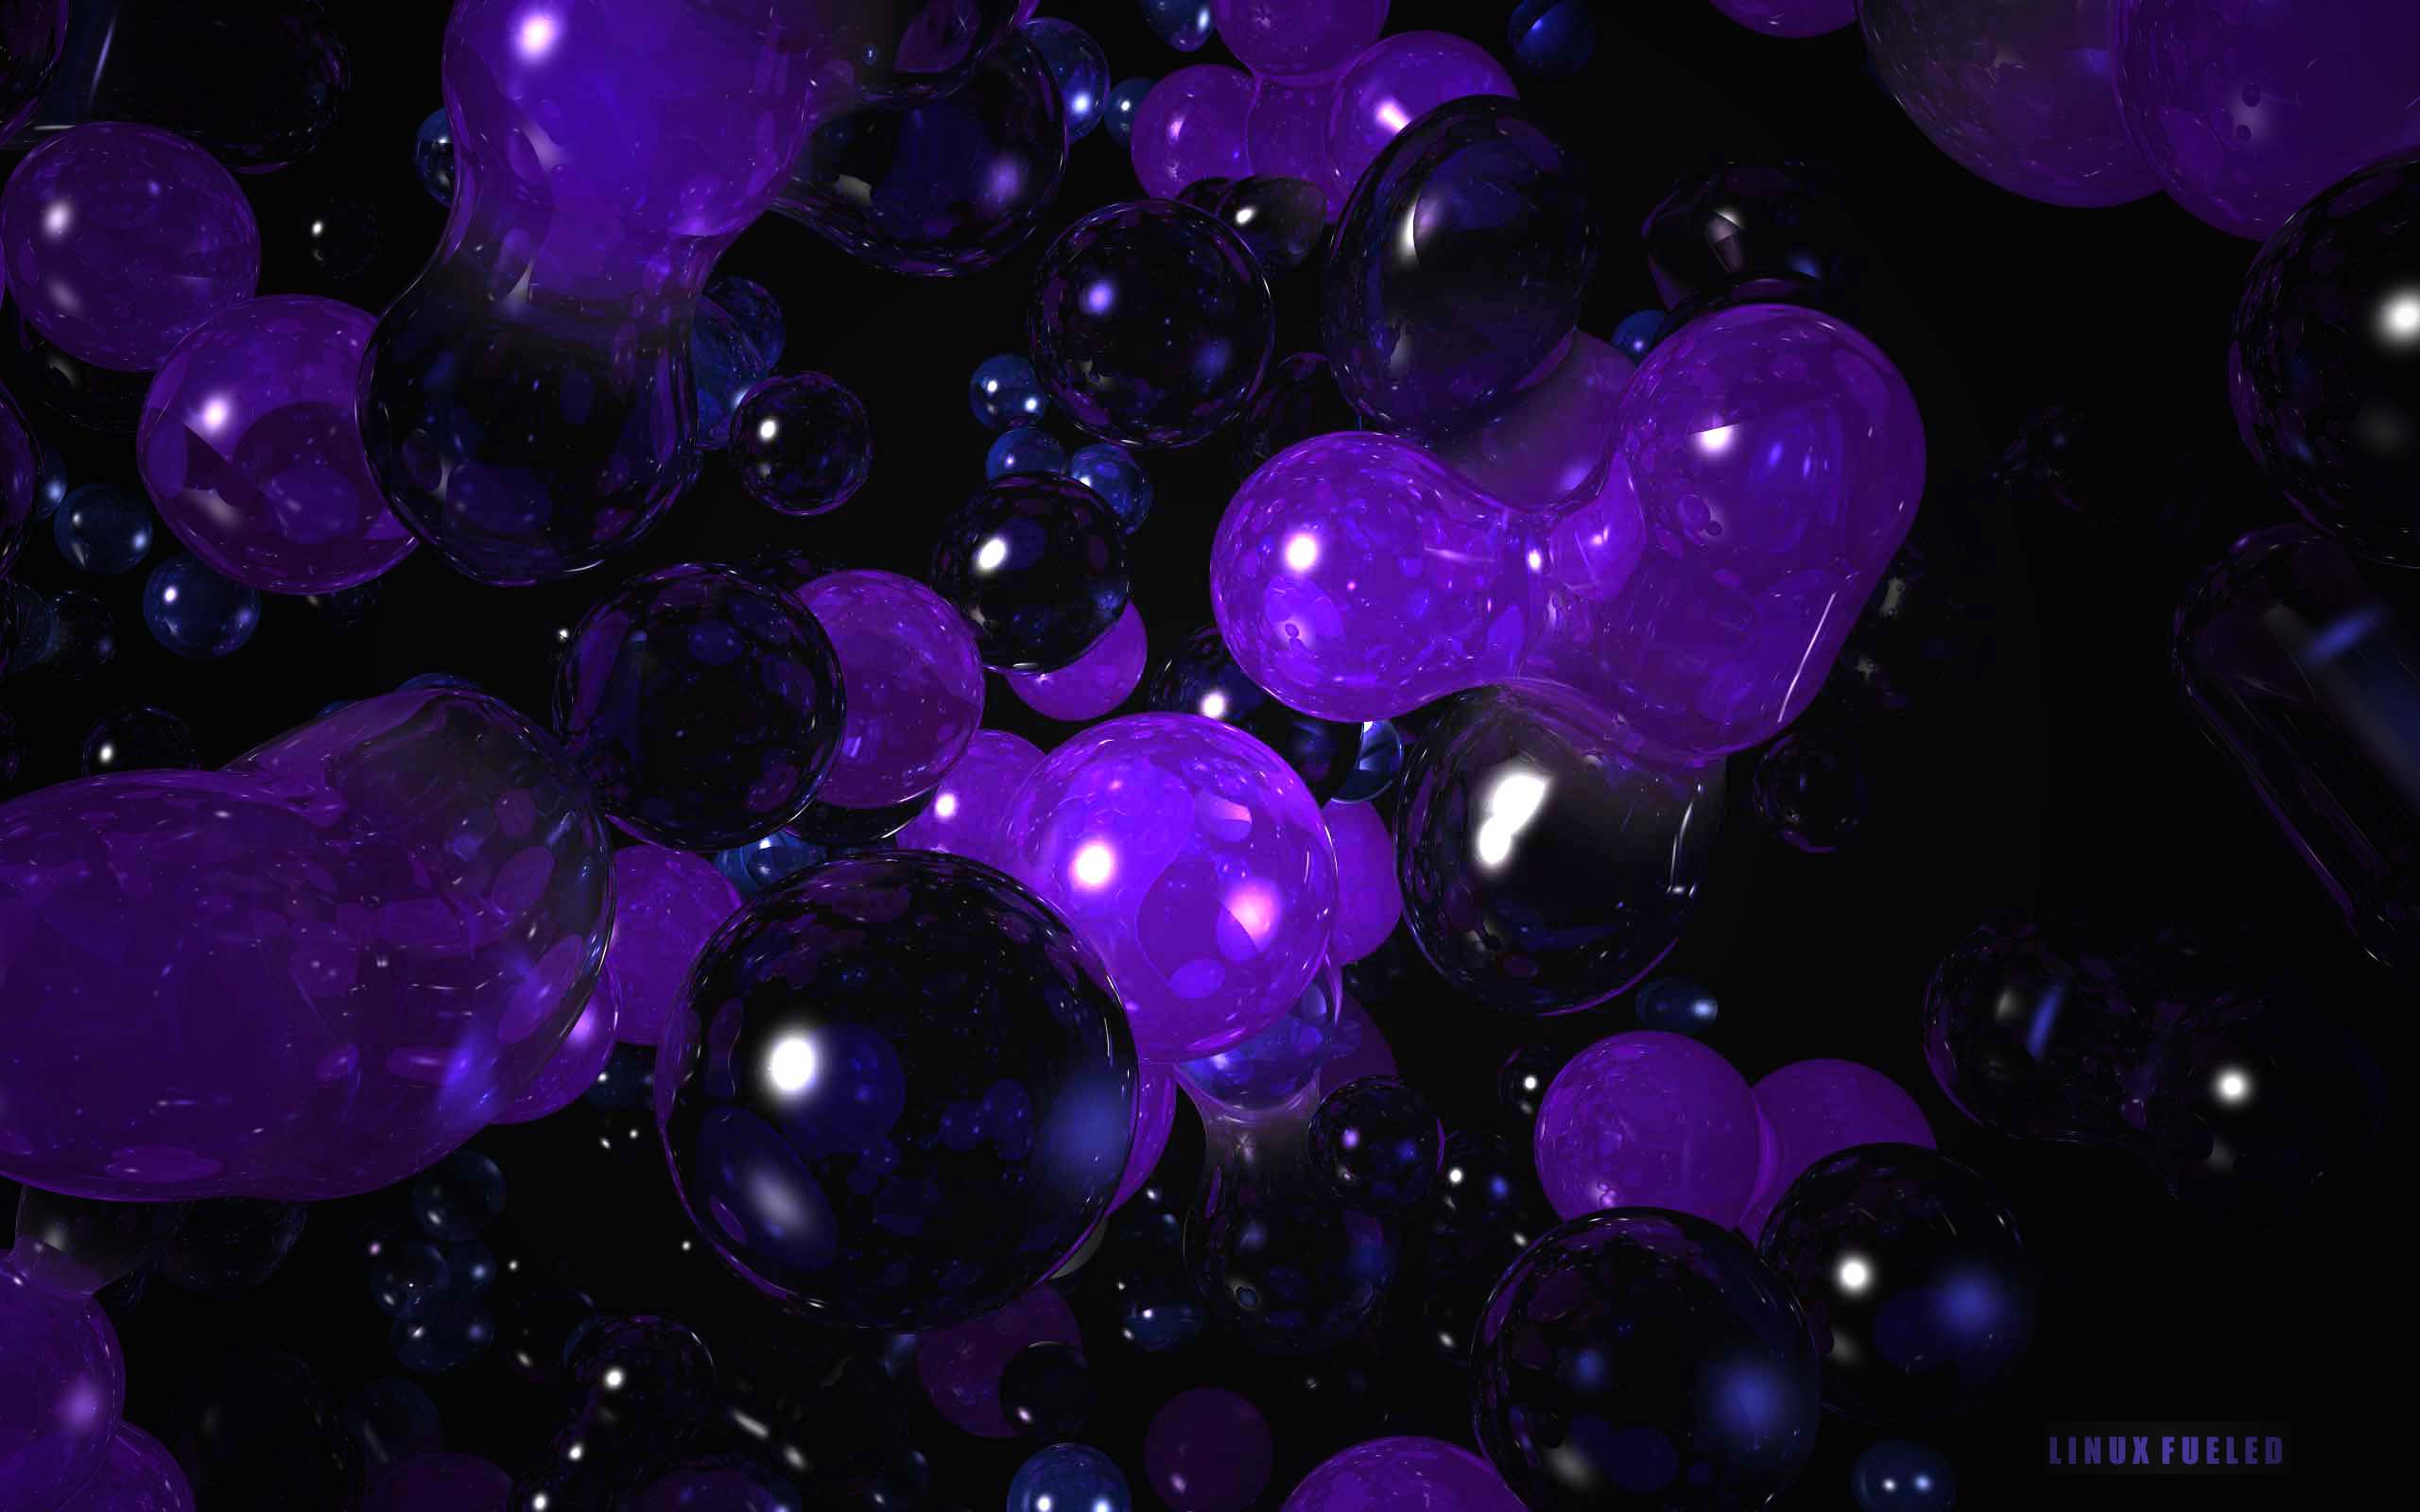 Abstract Purple HD Wallpaper Background Image 2560x1600 2560x1600